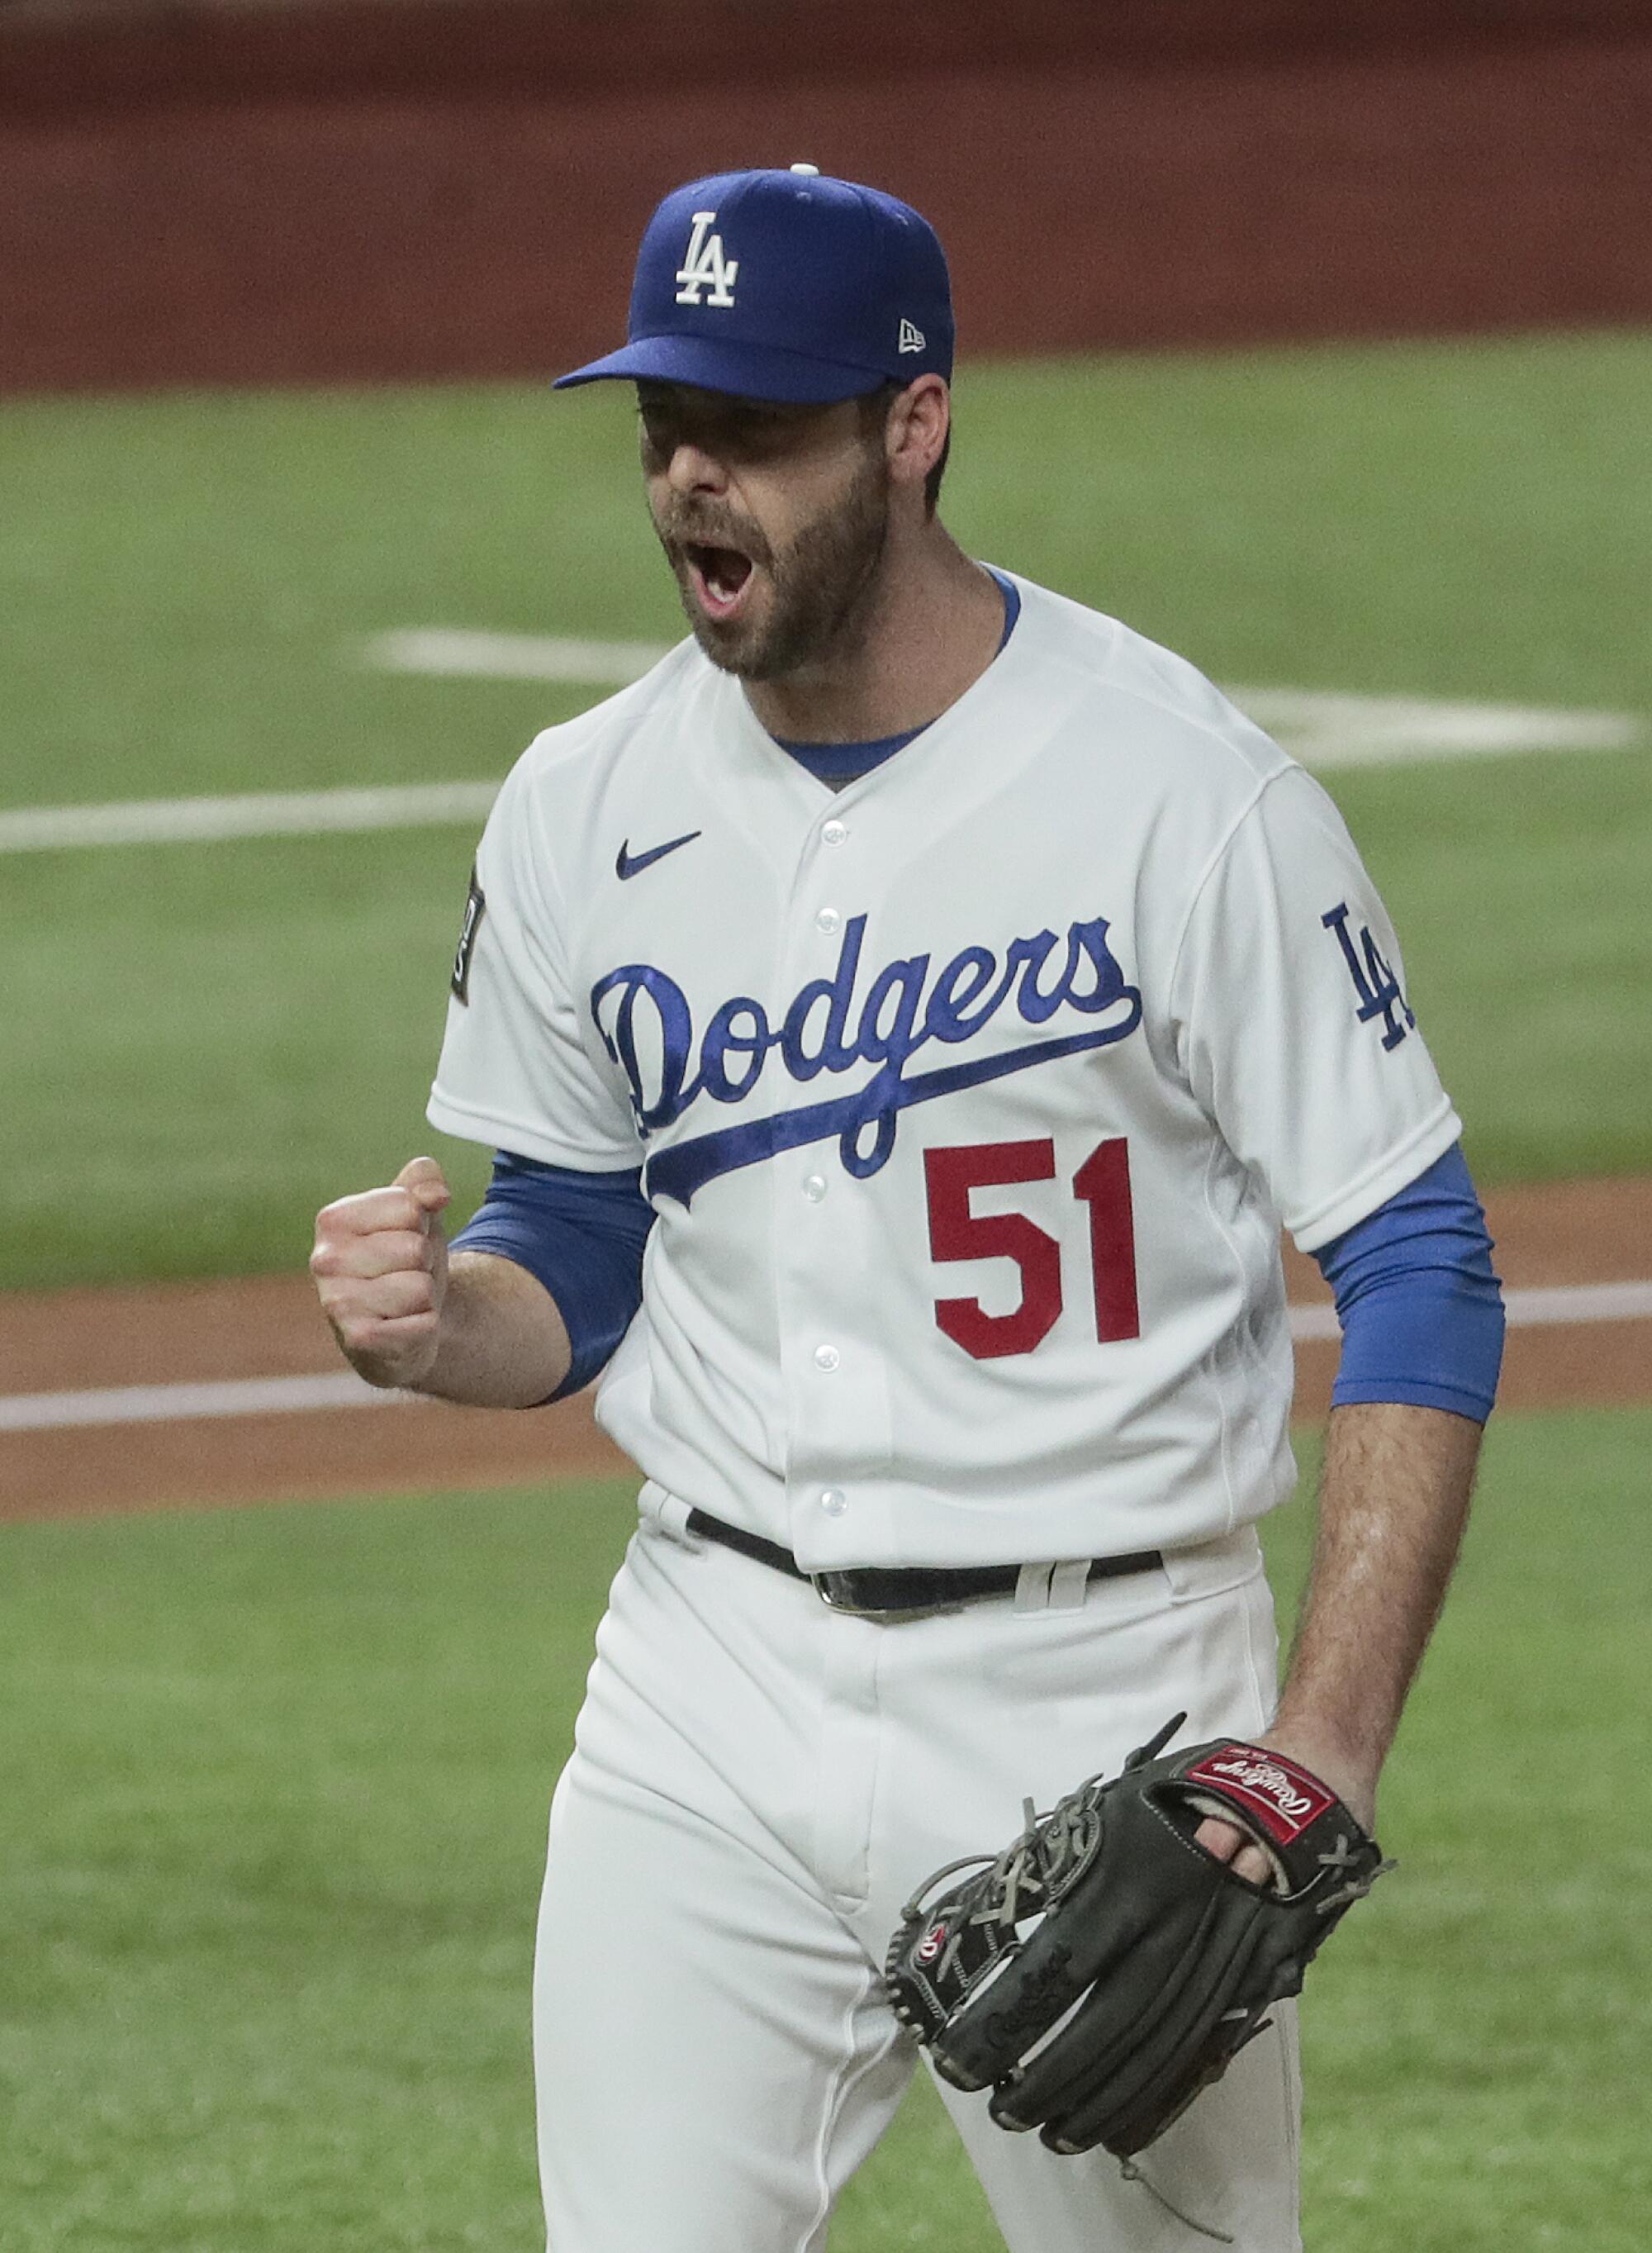 Dodgers relief pitcher Dylan Floro clenches a fist after striking out Randy Arozarena.